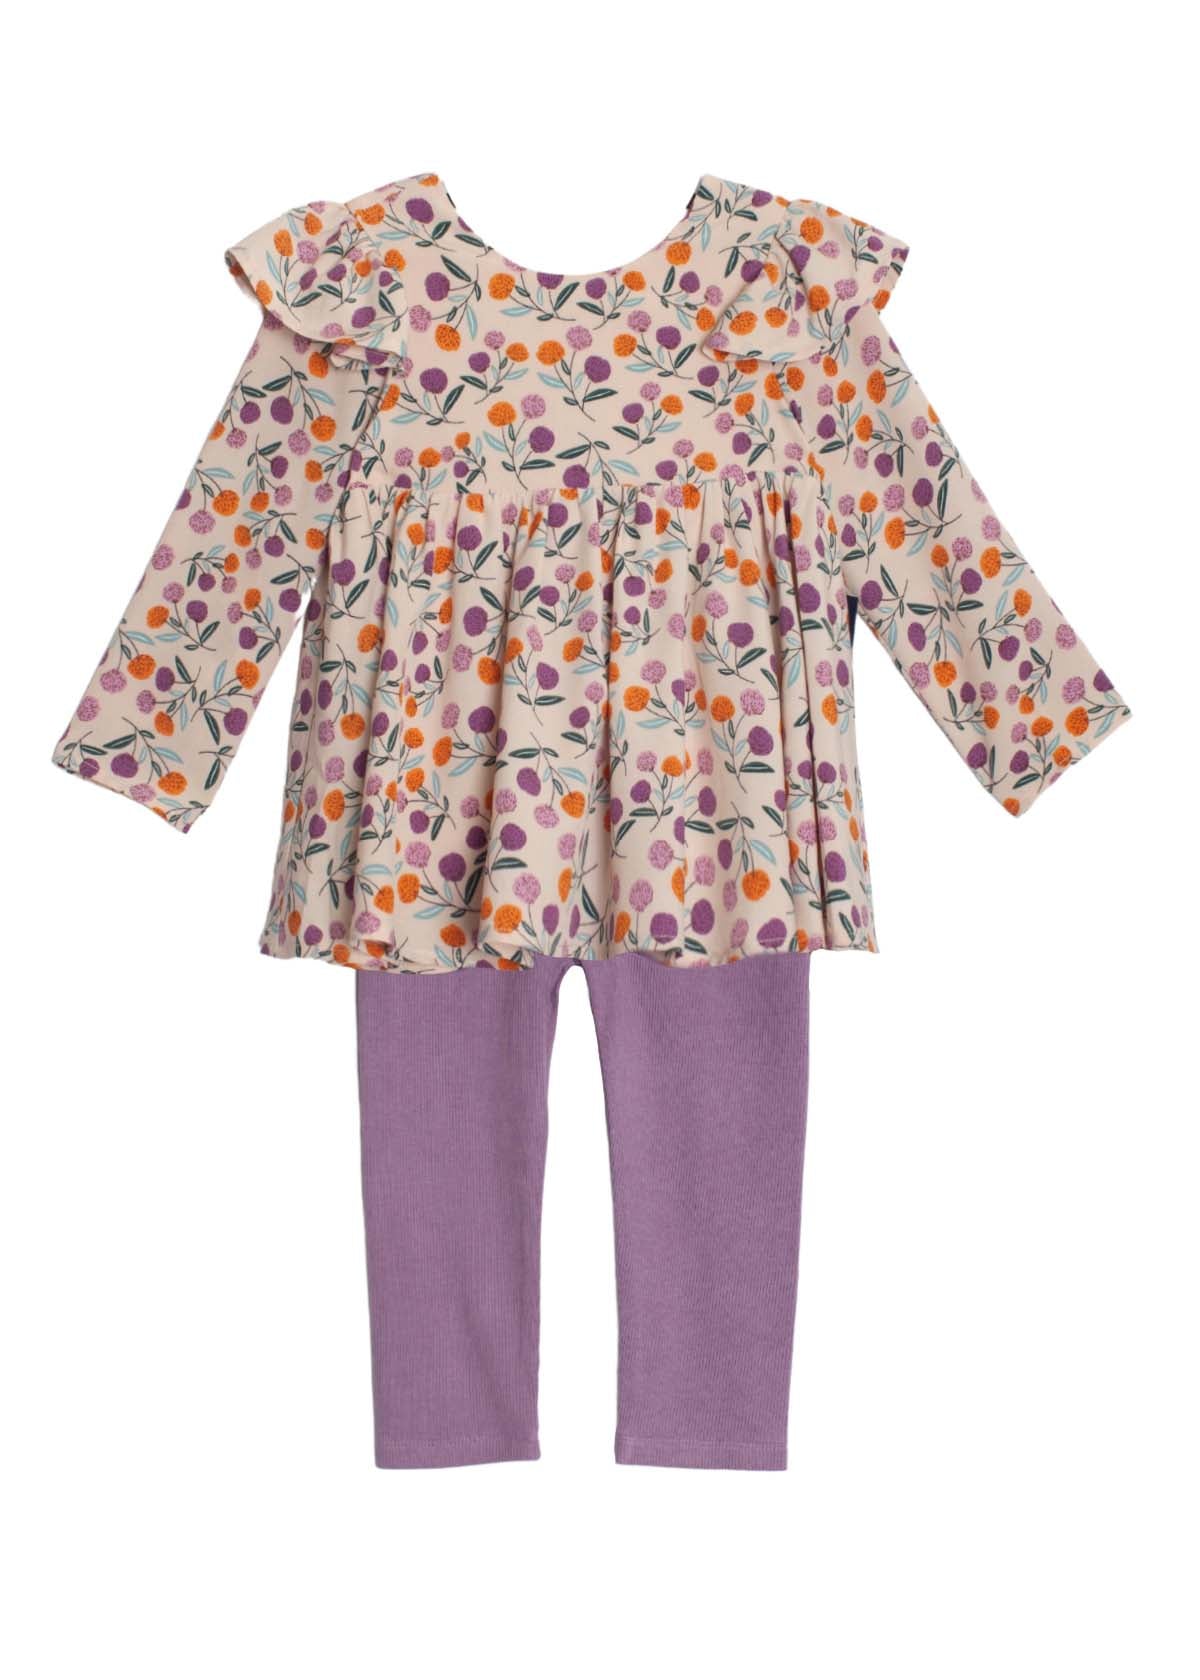 Mabel and Honey Dandelion Rayon and Knit 2 Piece Set